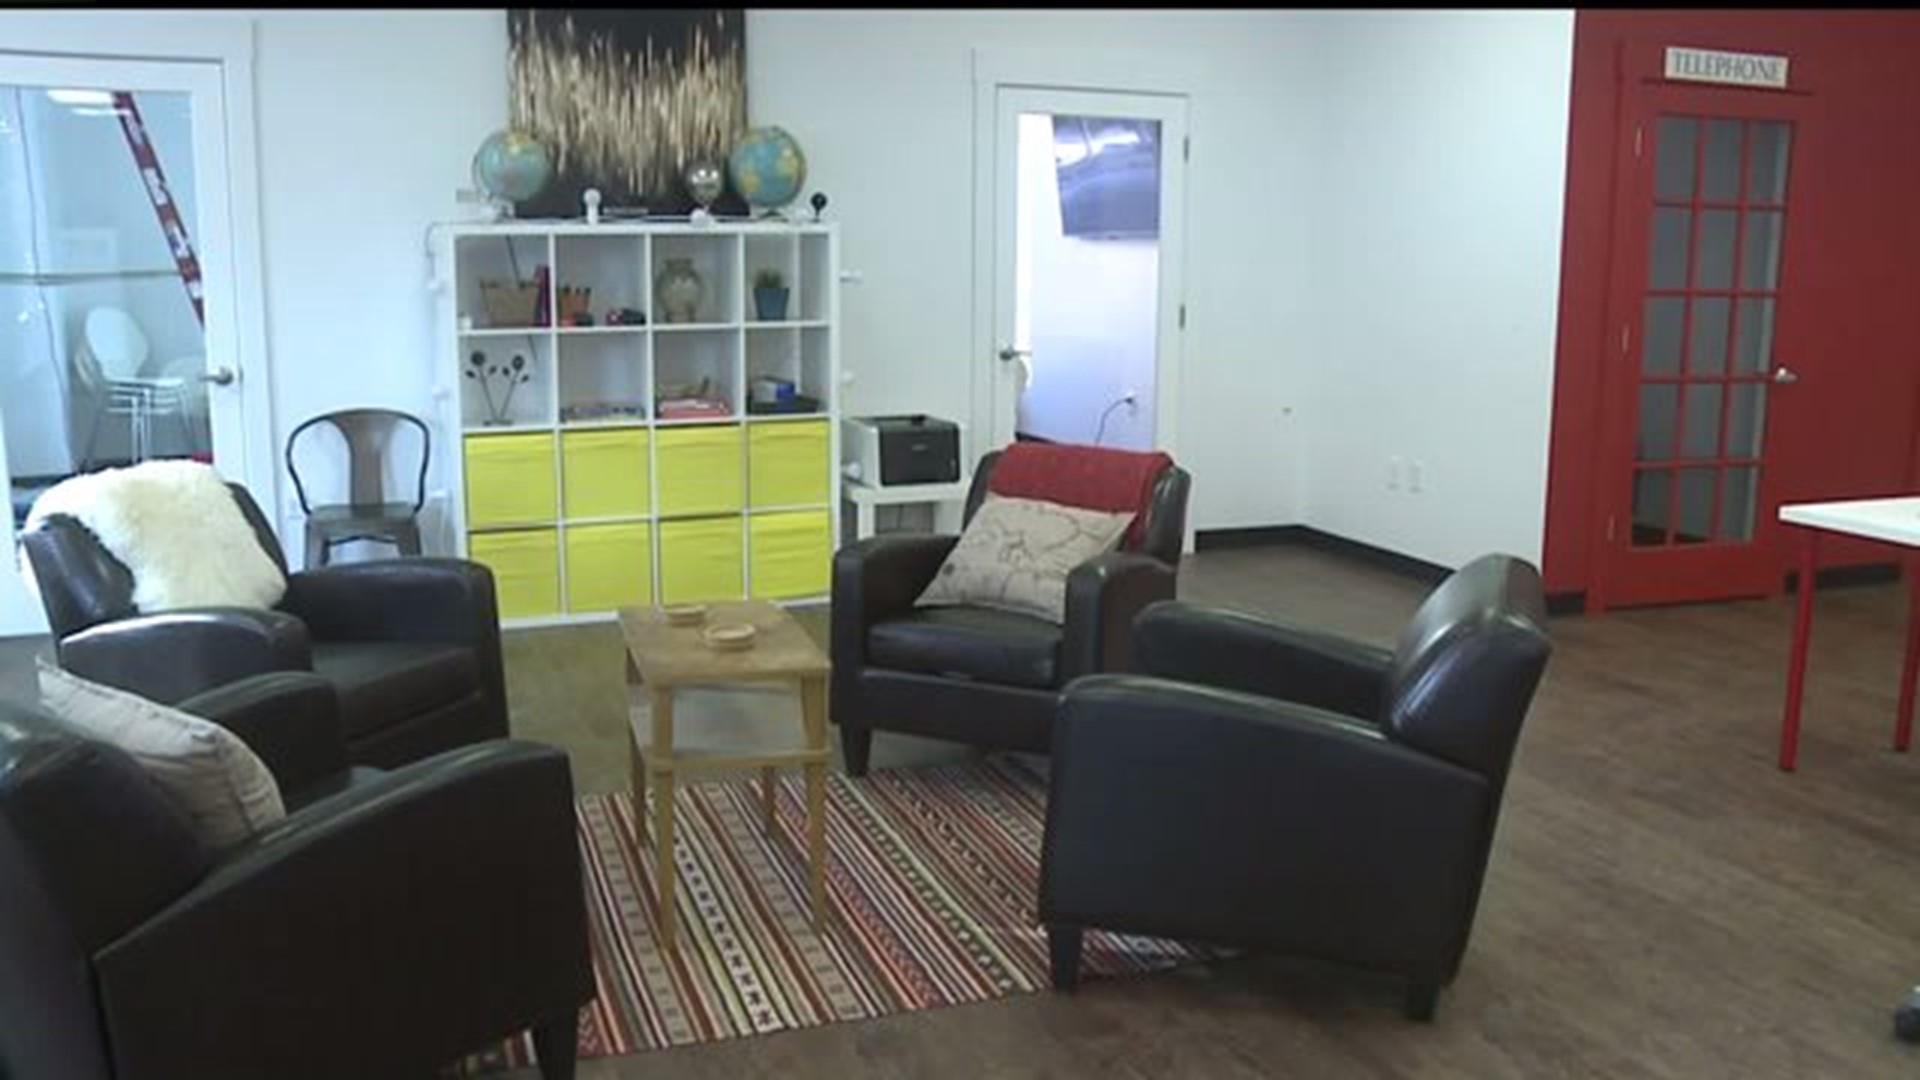 Coworkqc opens in downtown Davenport